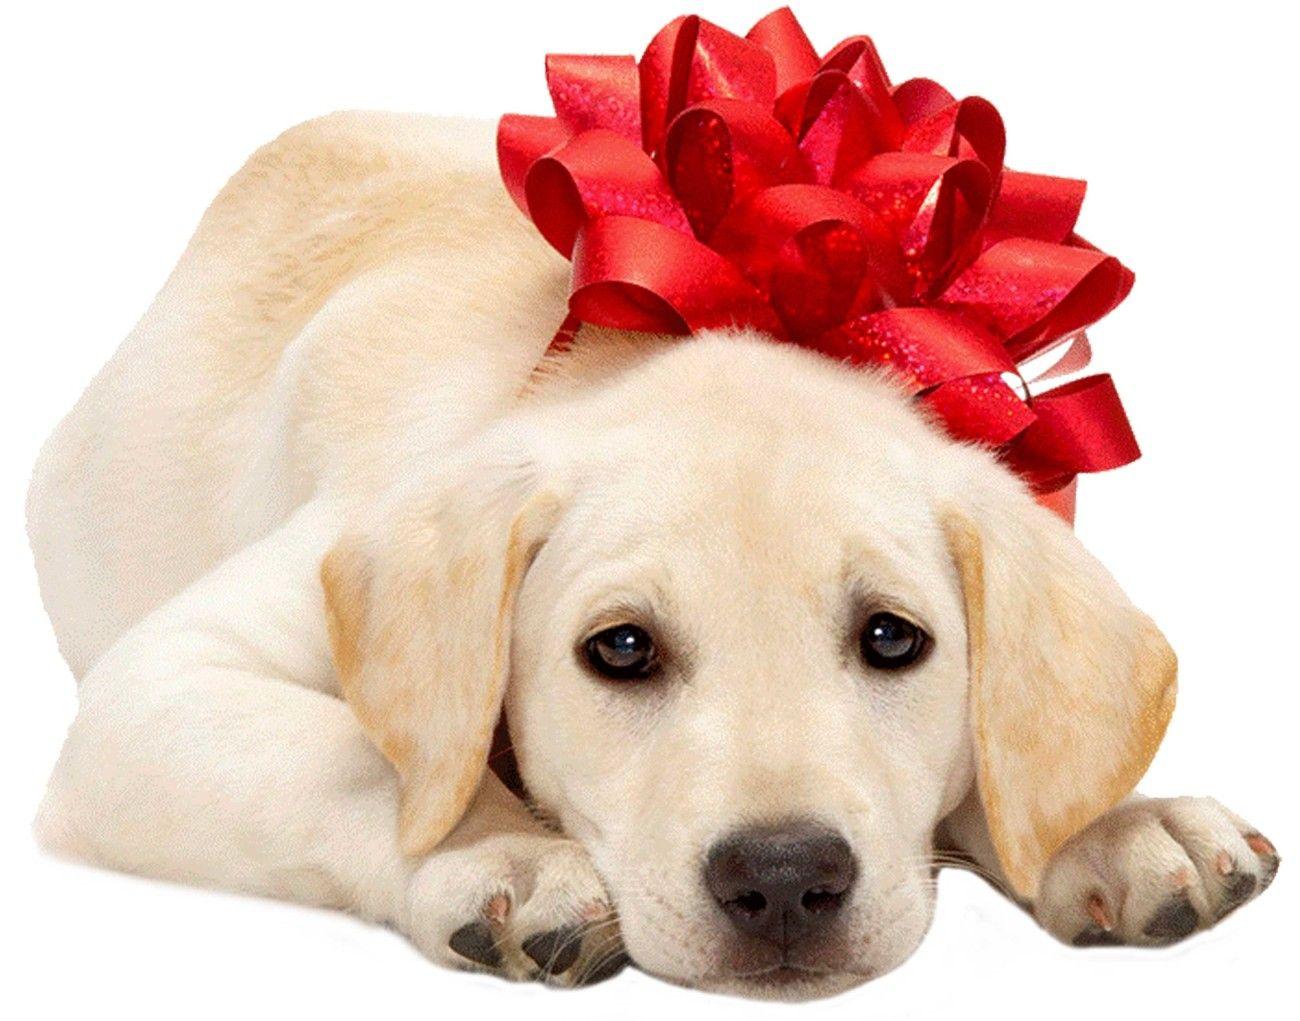 Christmas Puppies Photo. All Puppies Picture and Wallpaper